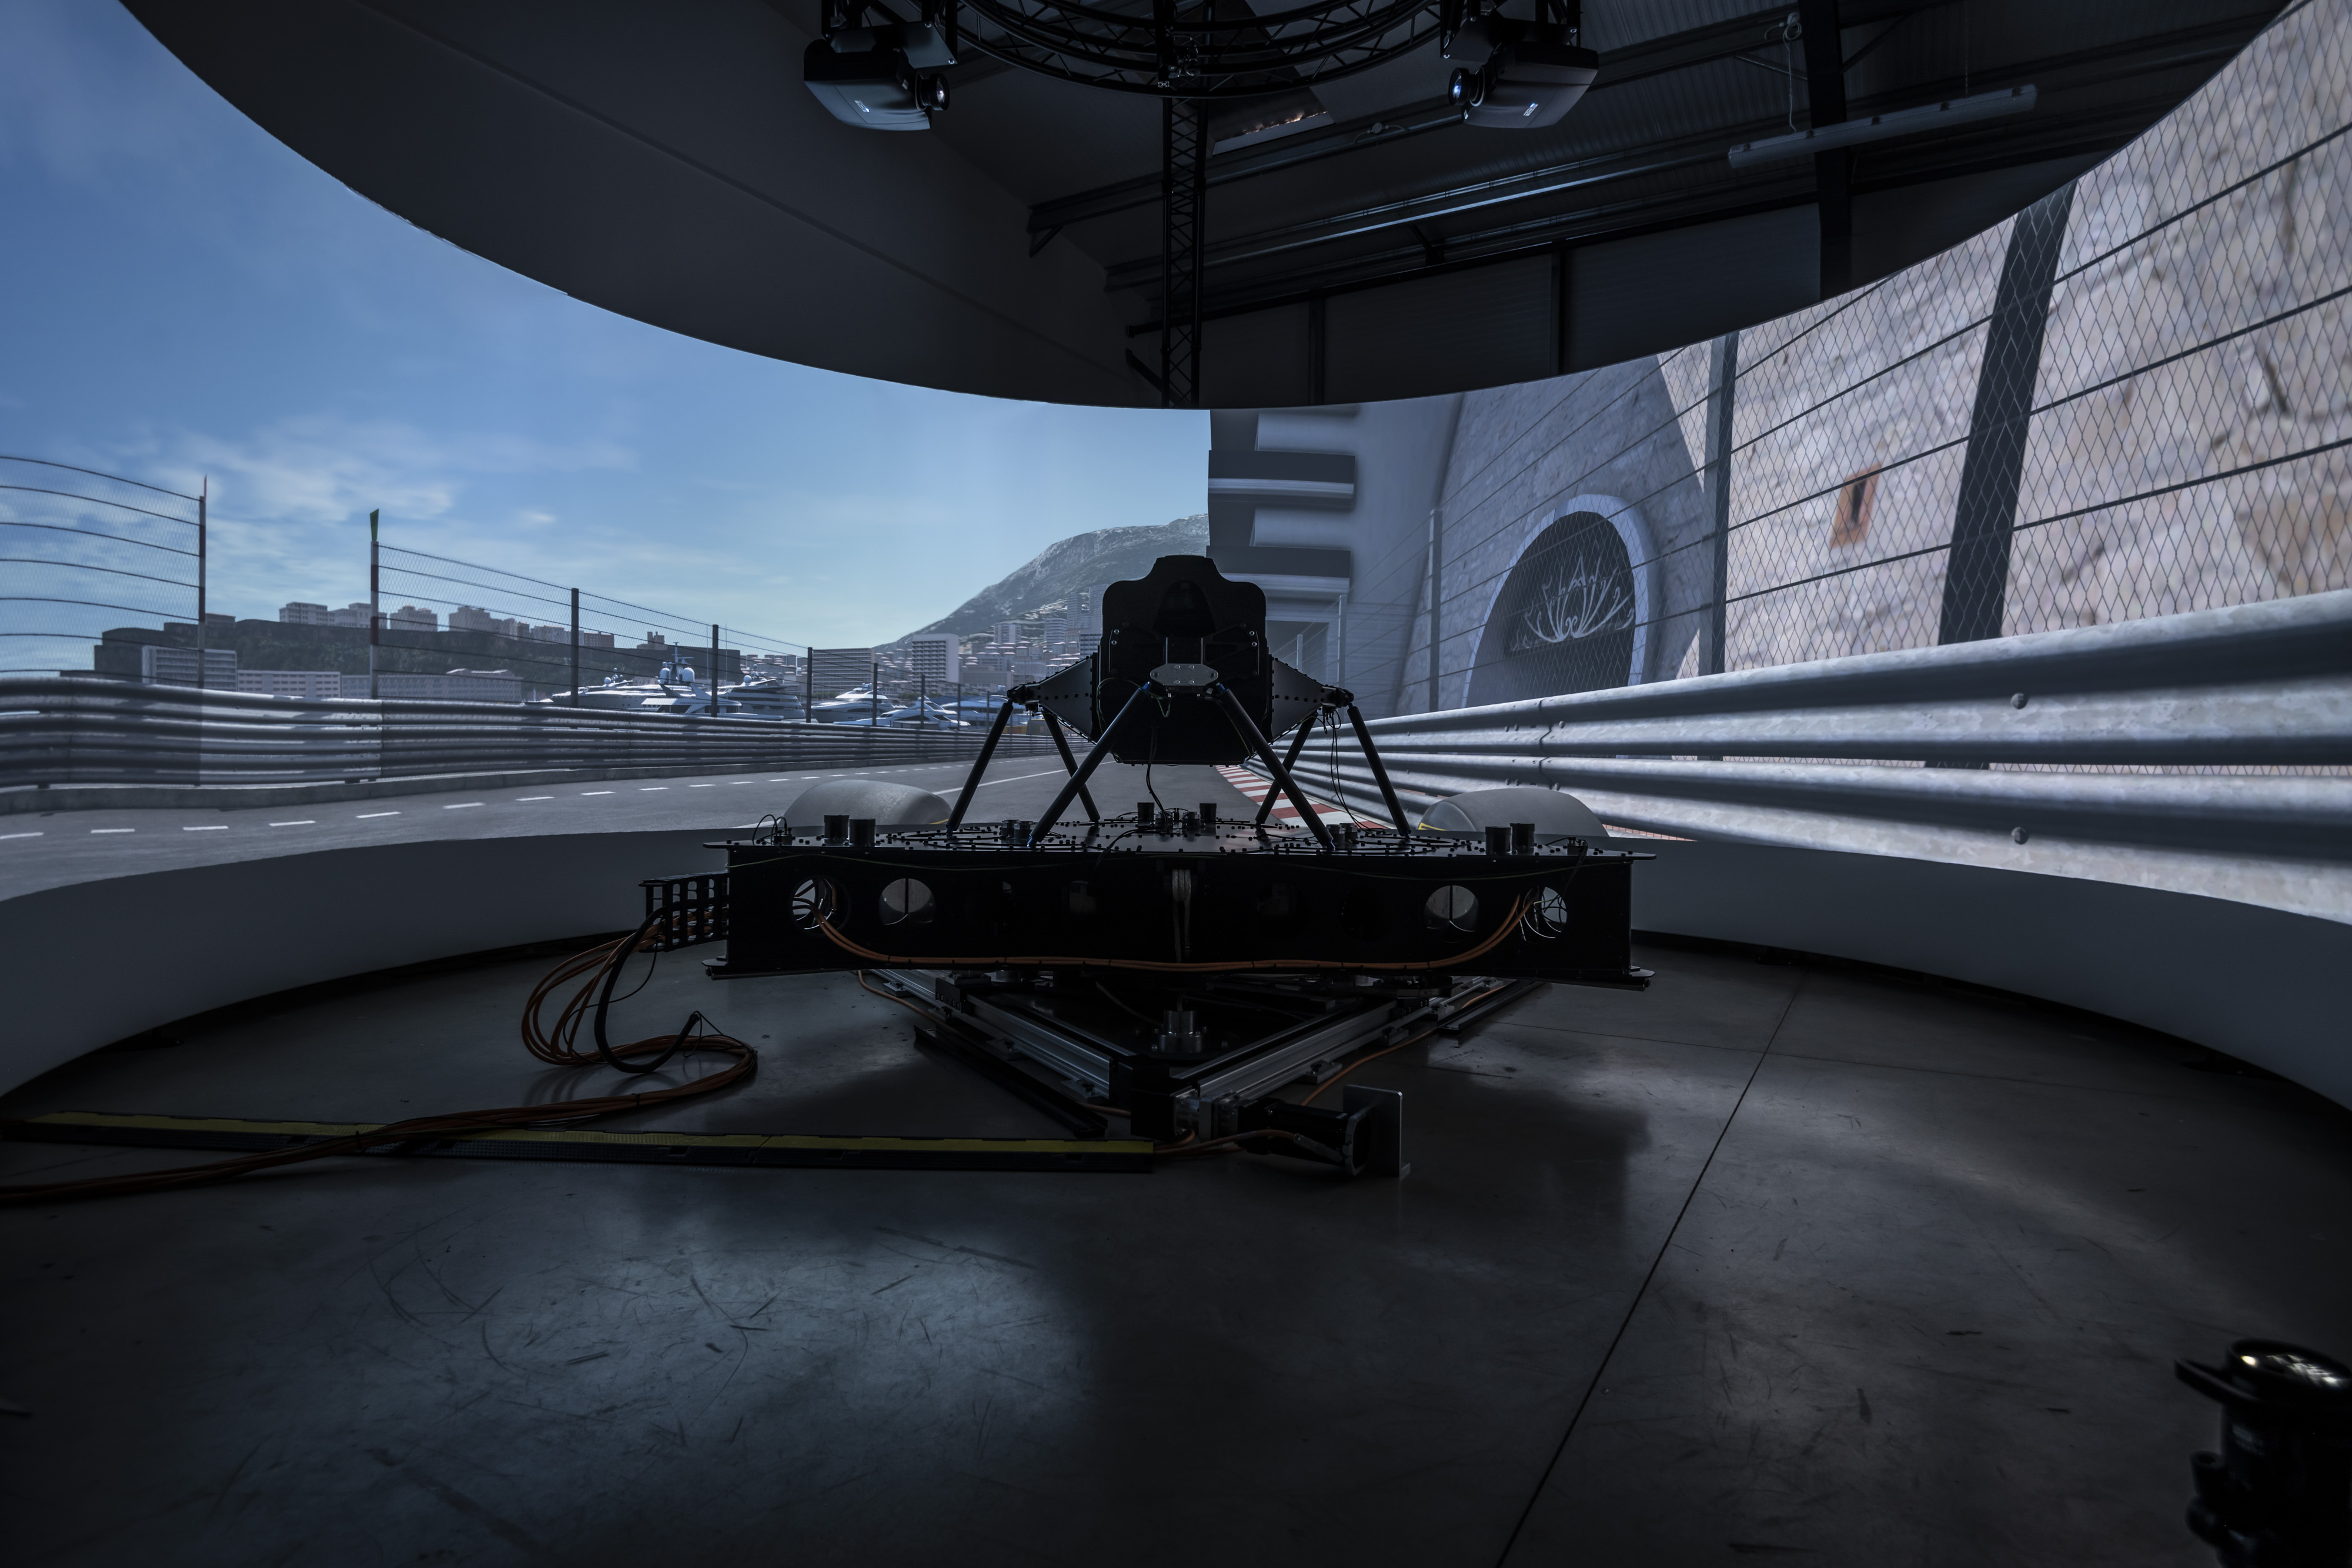 DYNISMA REVEALS THE WORLD’S MOST ADVANCED DRIVING SIMULATOR FOR AUTOMOTIVE VEHICLE AND MOTORSPORT DEVELOPMENT